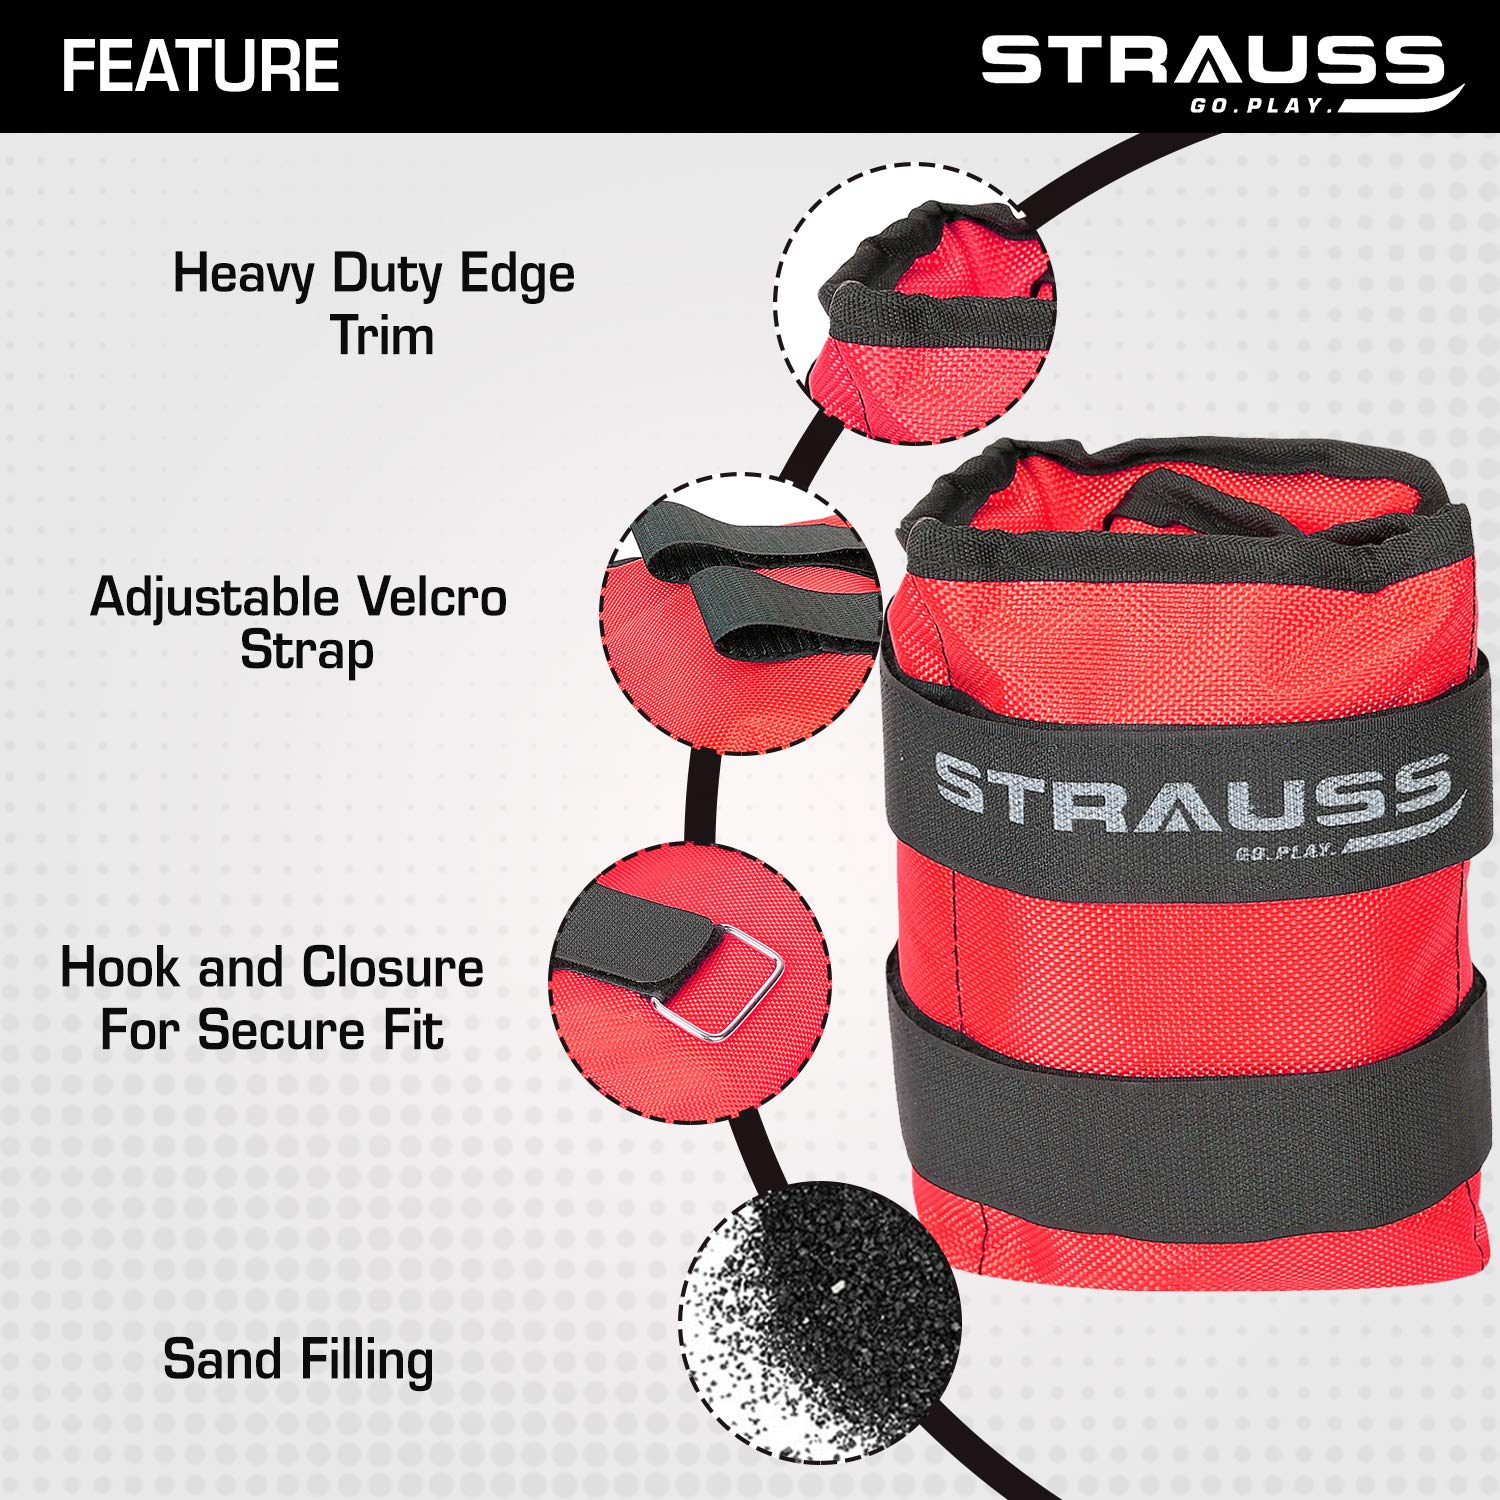 Strauss Adjustable Ankle/Wrist Weights 2.5 KG X 2 | Ideal for Walking, Running, Jogging, Cycling, Gym, Workout & Strength Training | Easy to Use on Ankle, Wrist, Leg, (Red)